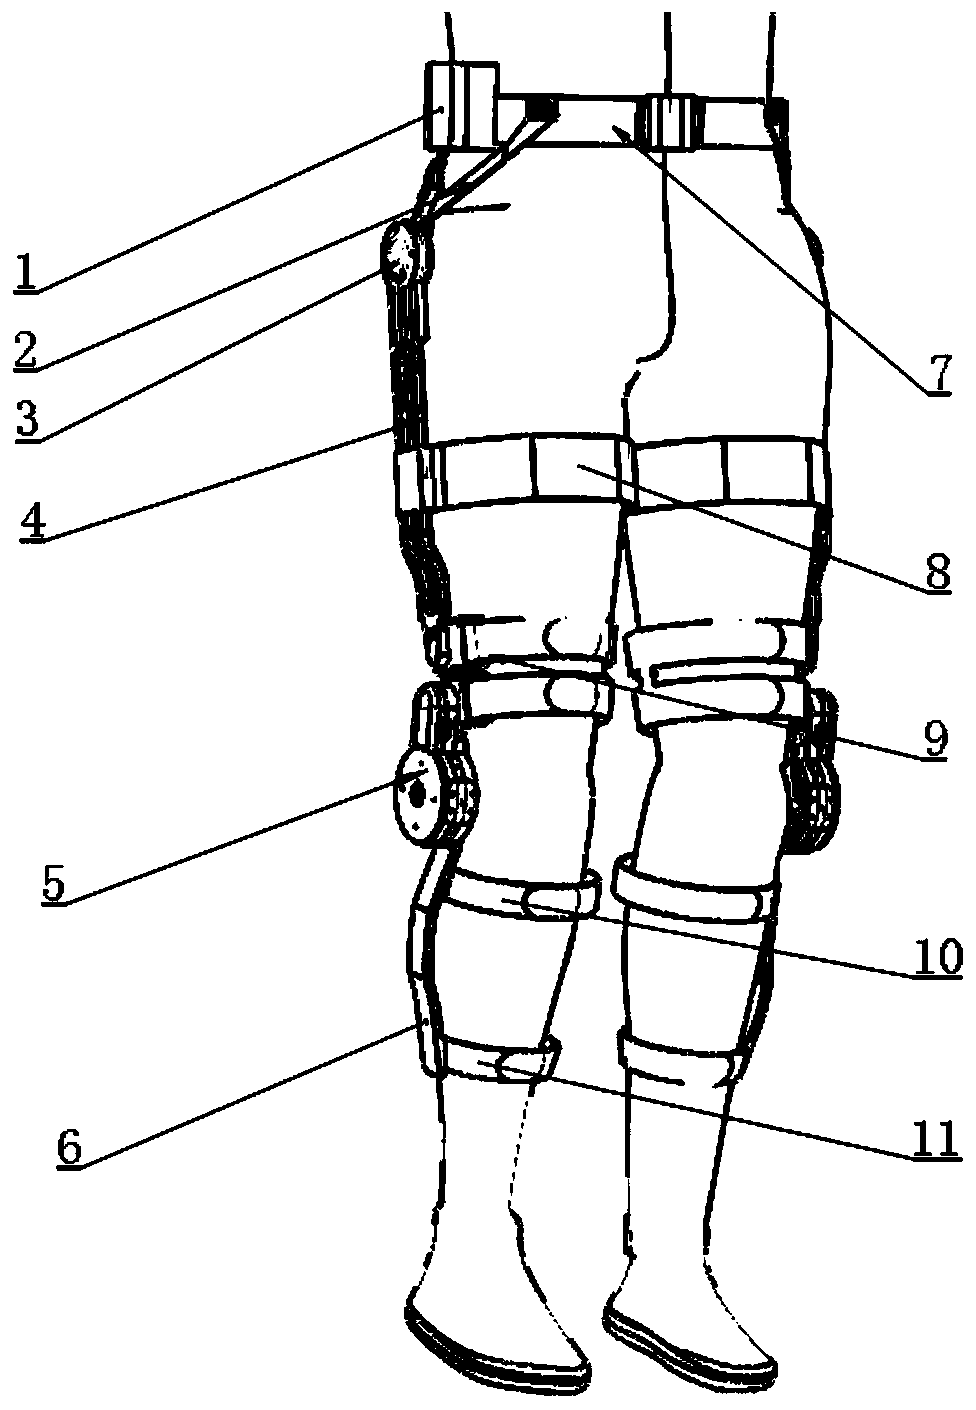 Power-assisted lower limb exoskeleton device